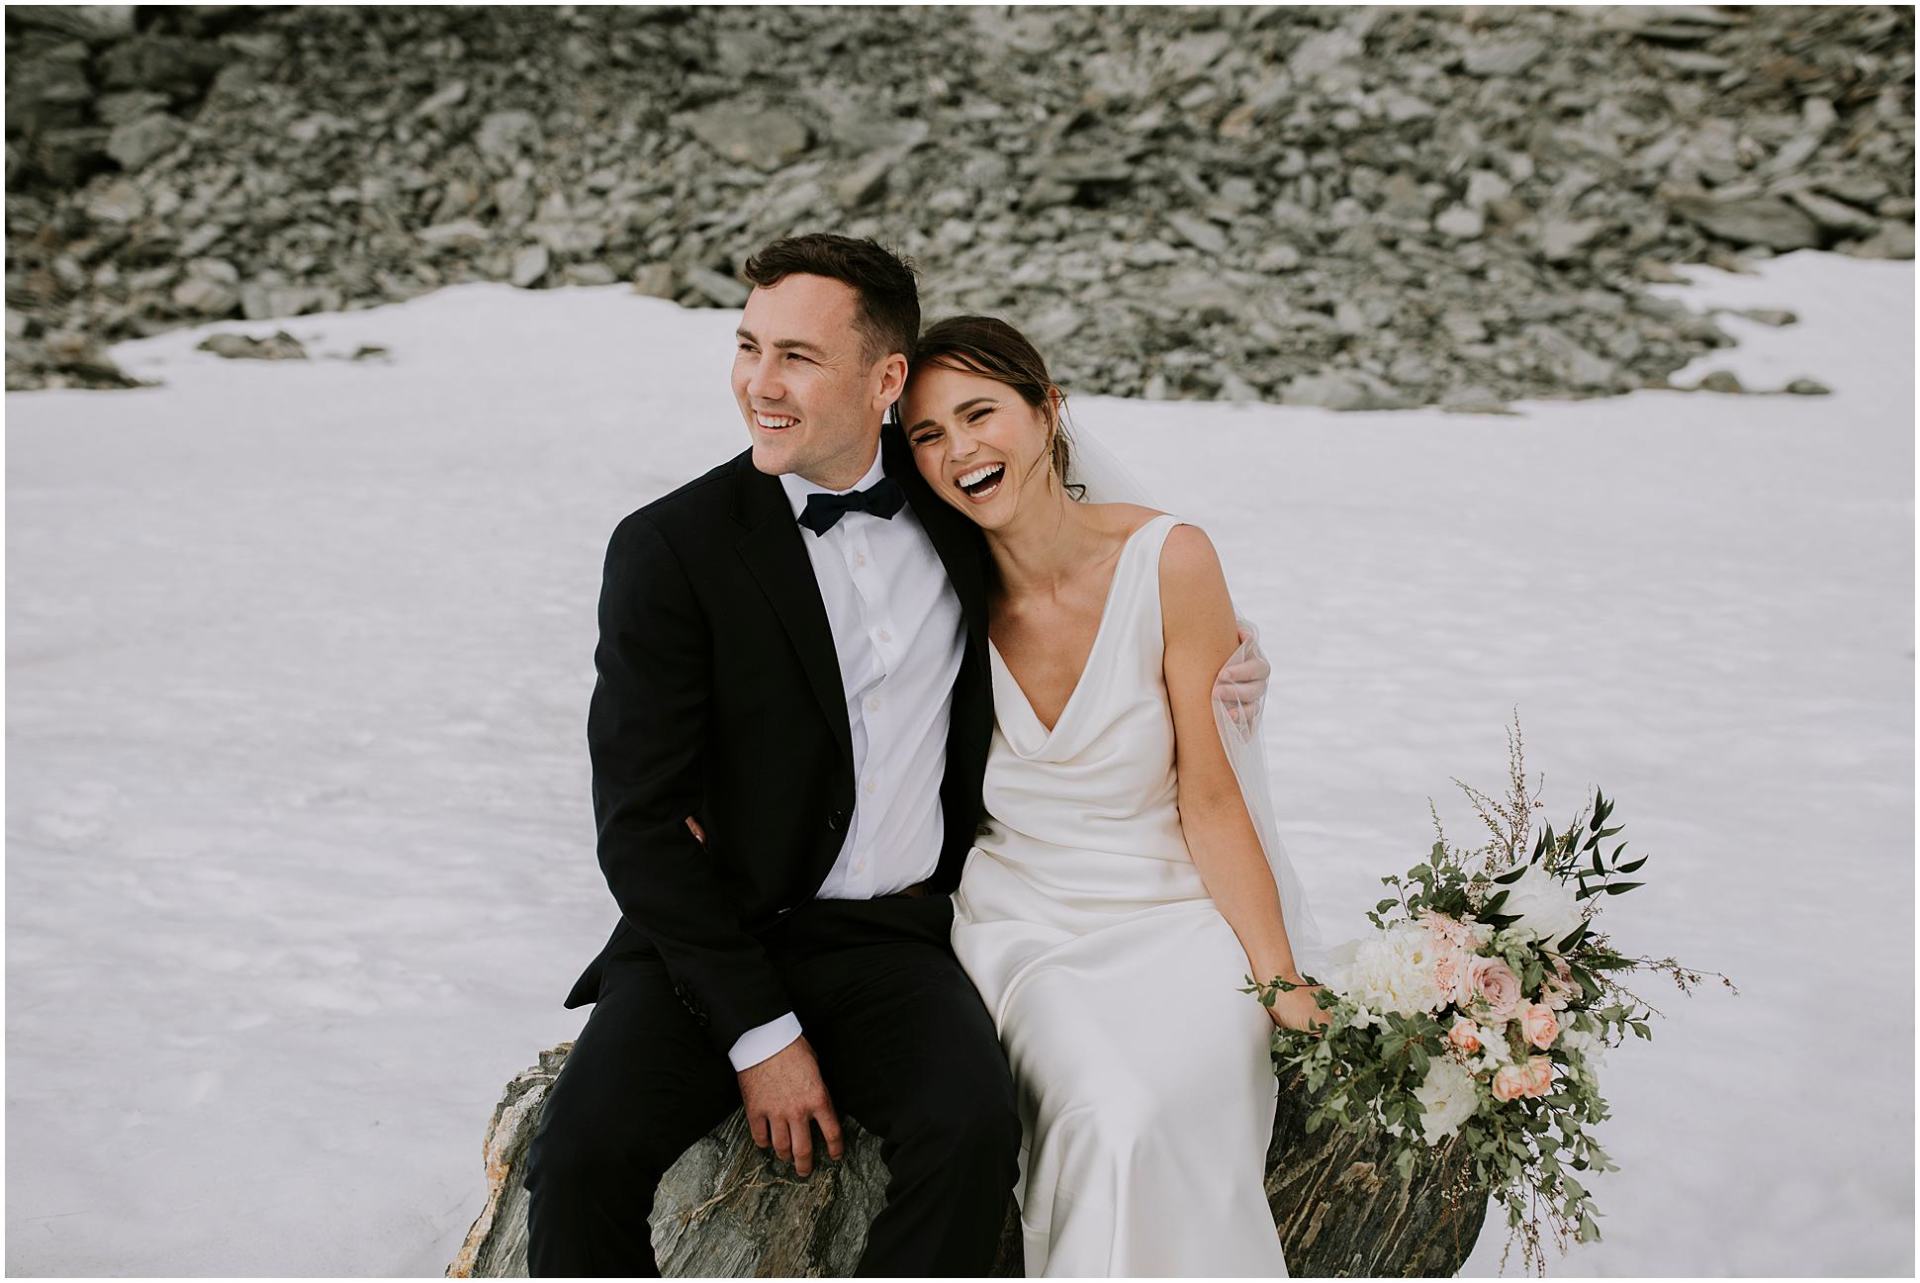 Charlotte Kiri Photography - Wedding Photography of a bride wearing a pretty satin cowl gown laughing and hugging her groom who is dressed in a black tuxedo as they sit together on a rock next to a glacier near Coromandel Peak in Wanaka, New Zealand.